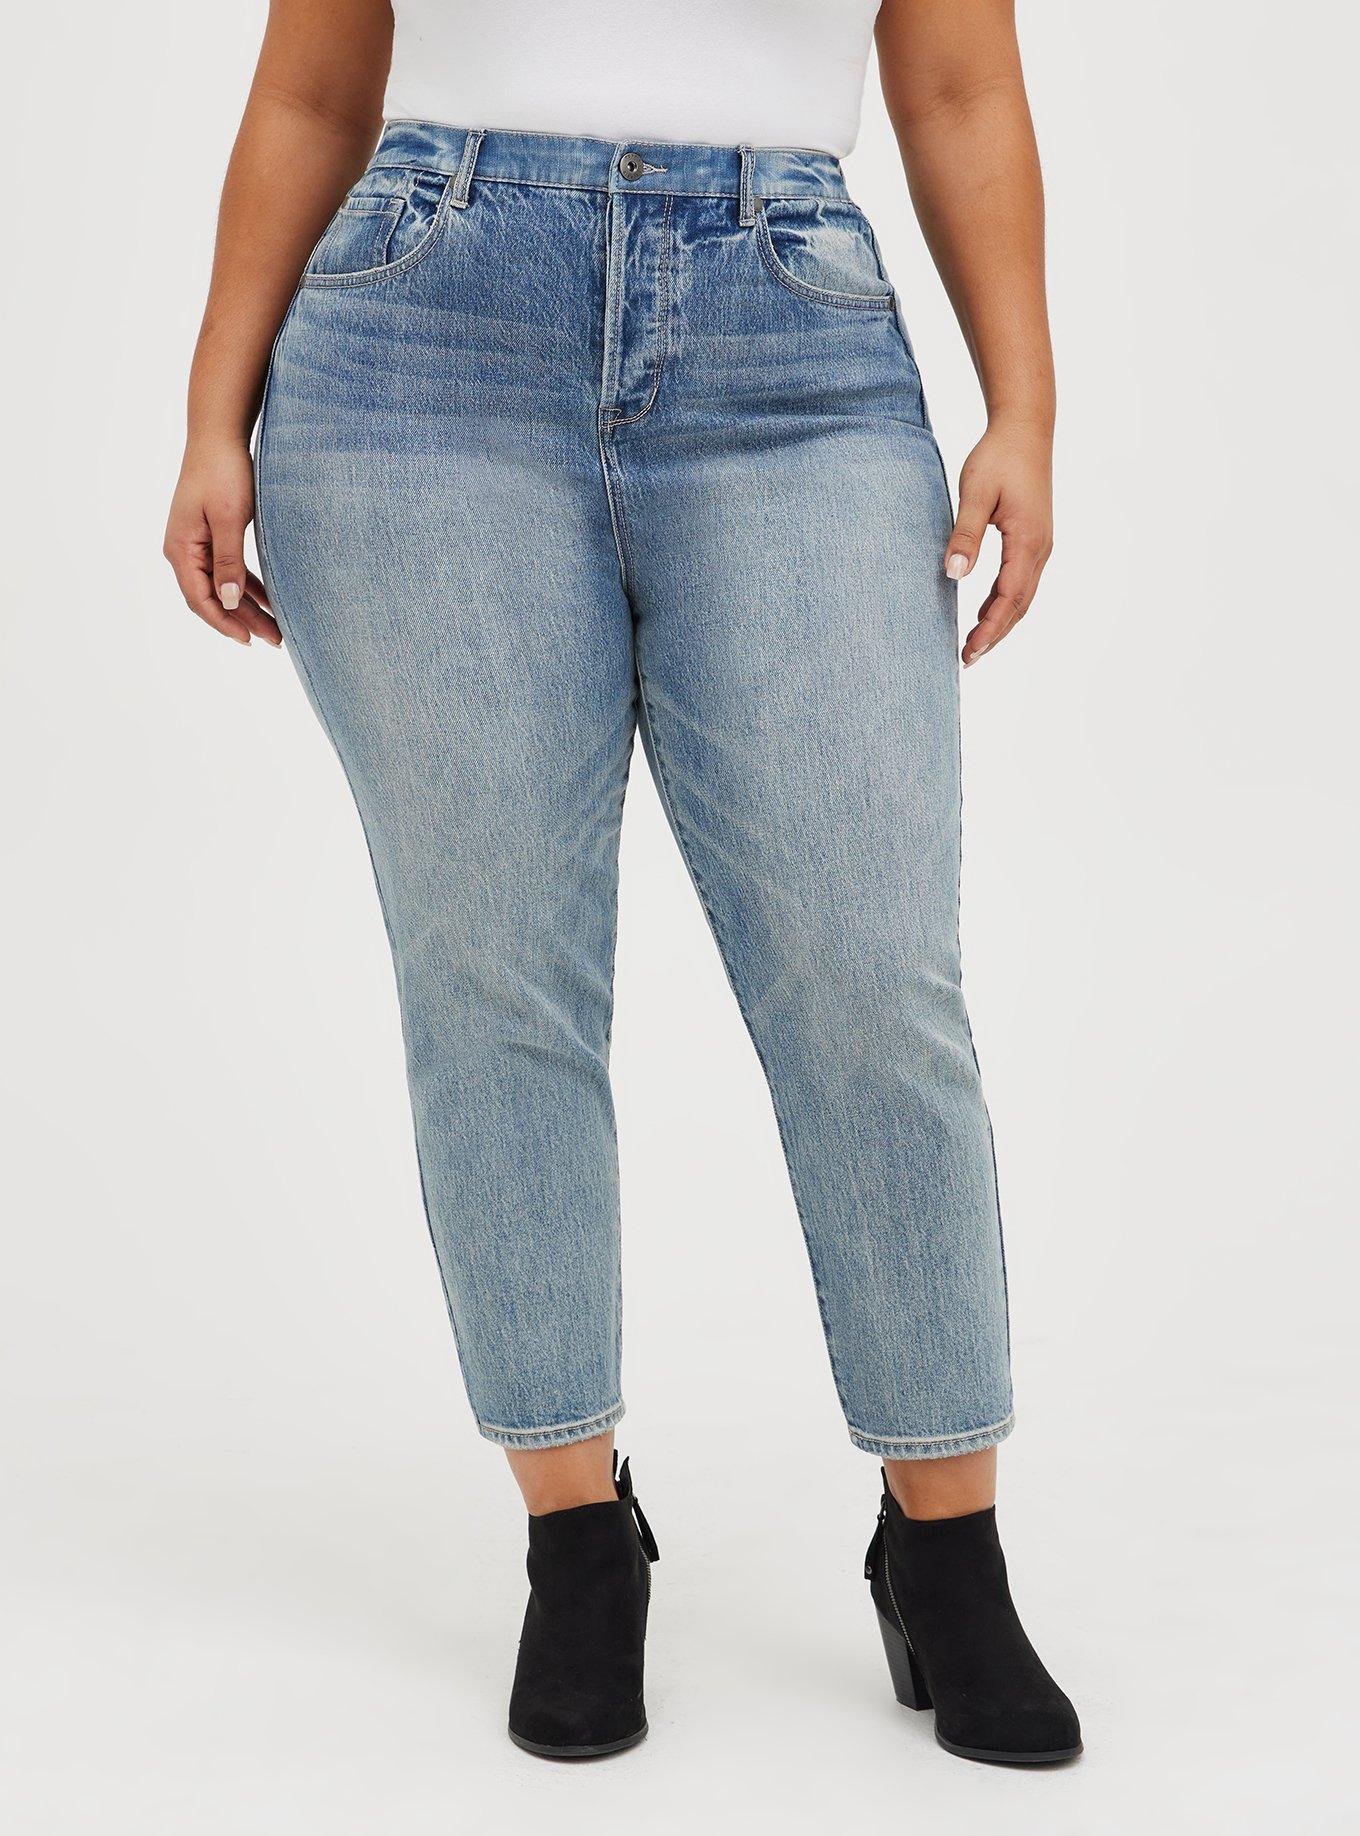 Gap's Black Flare Jeans for a Casual Date Night Outfit - The Mom Edit